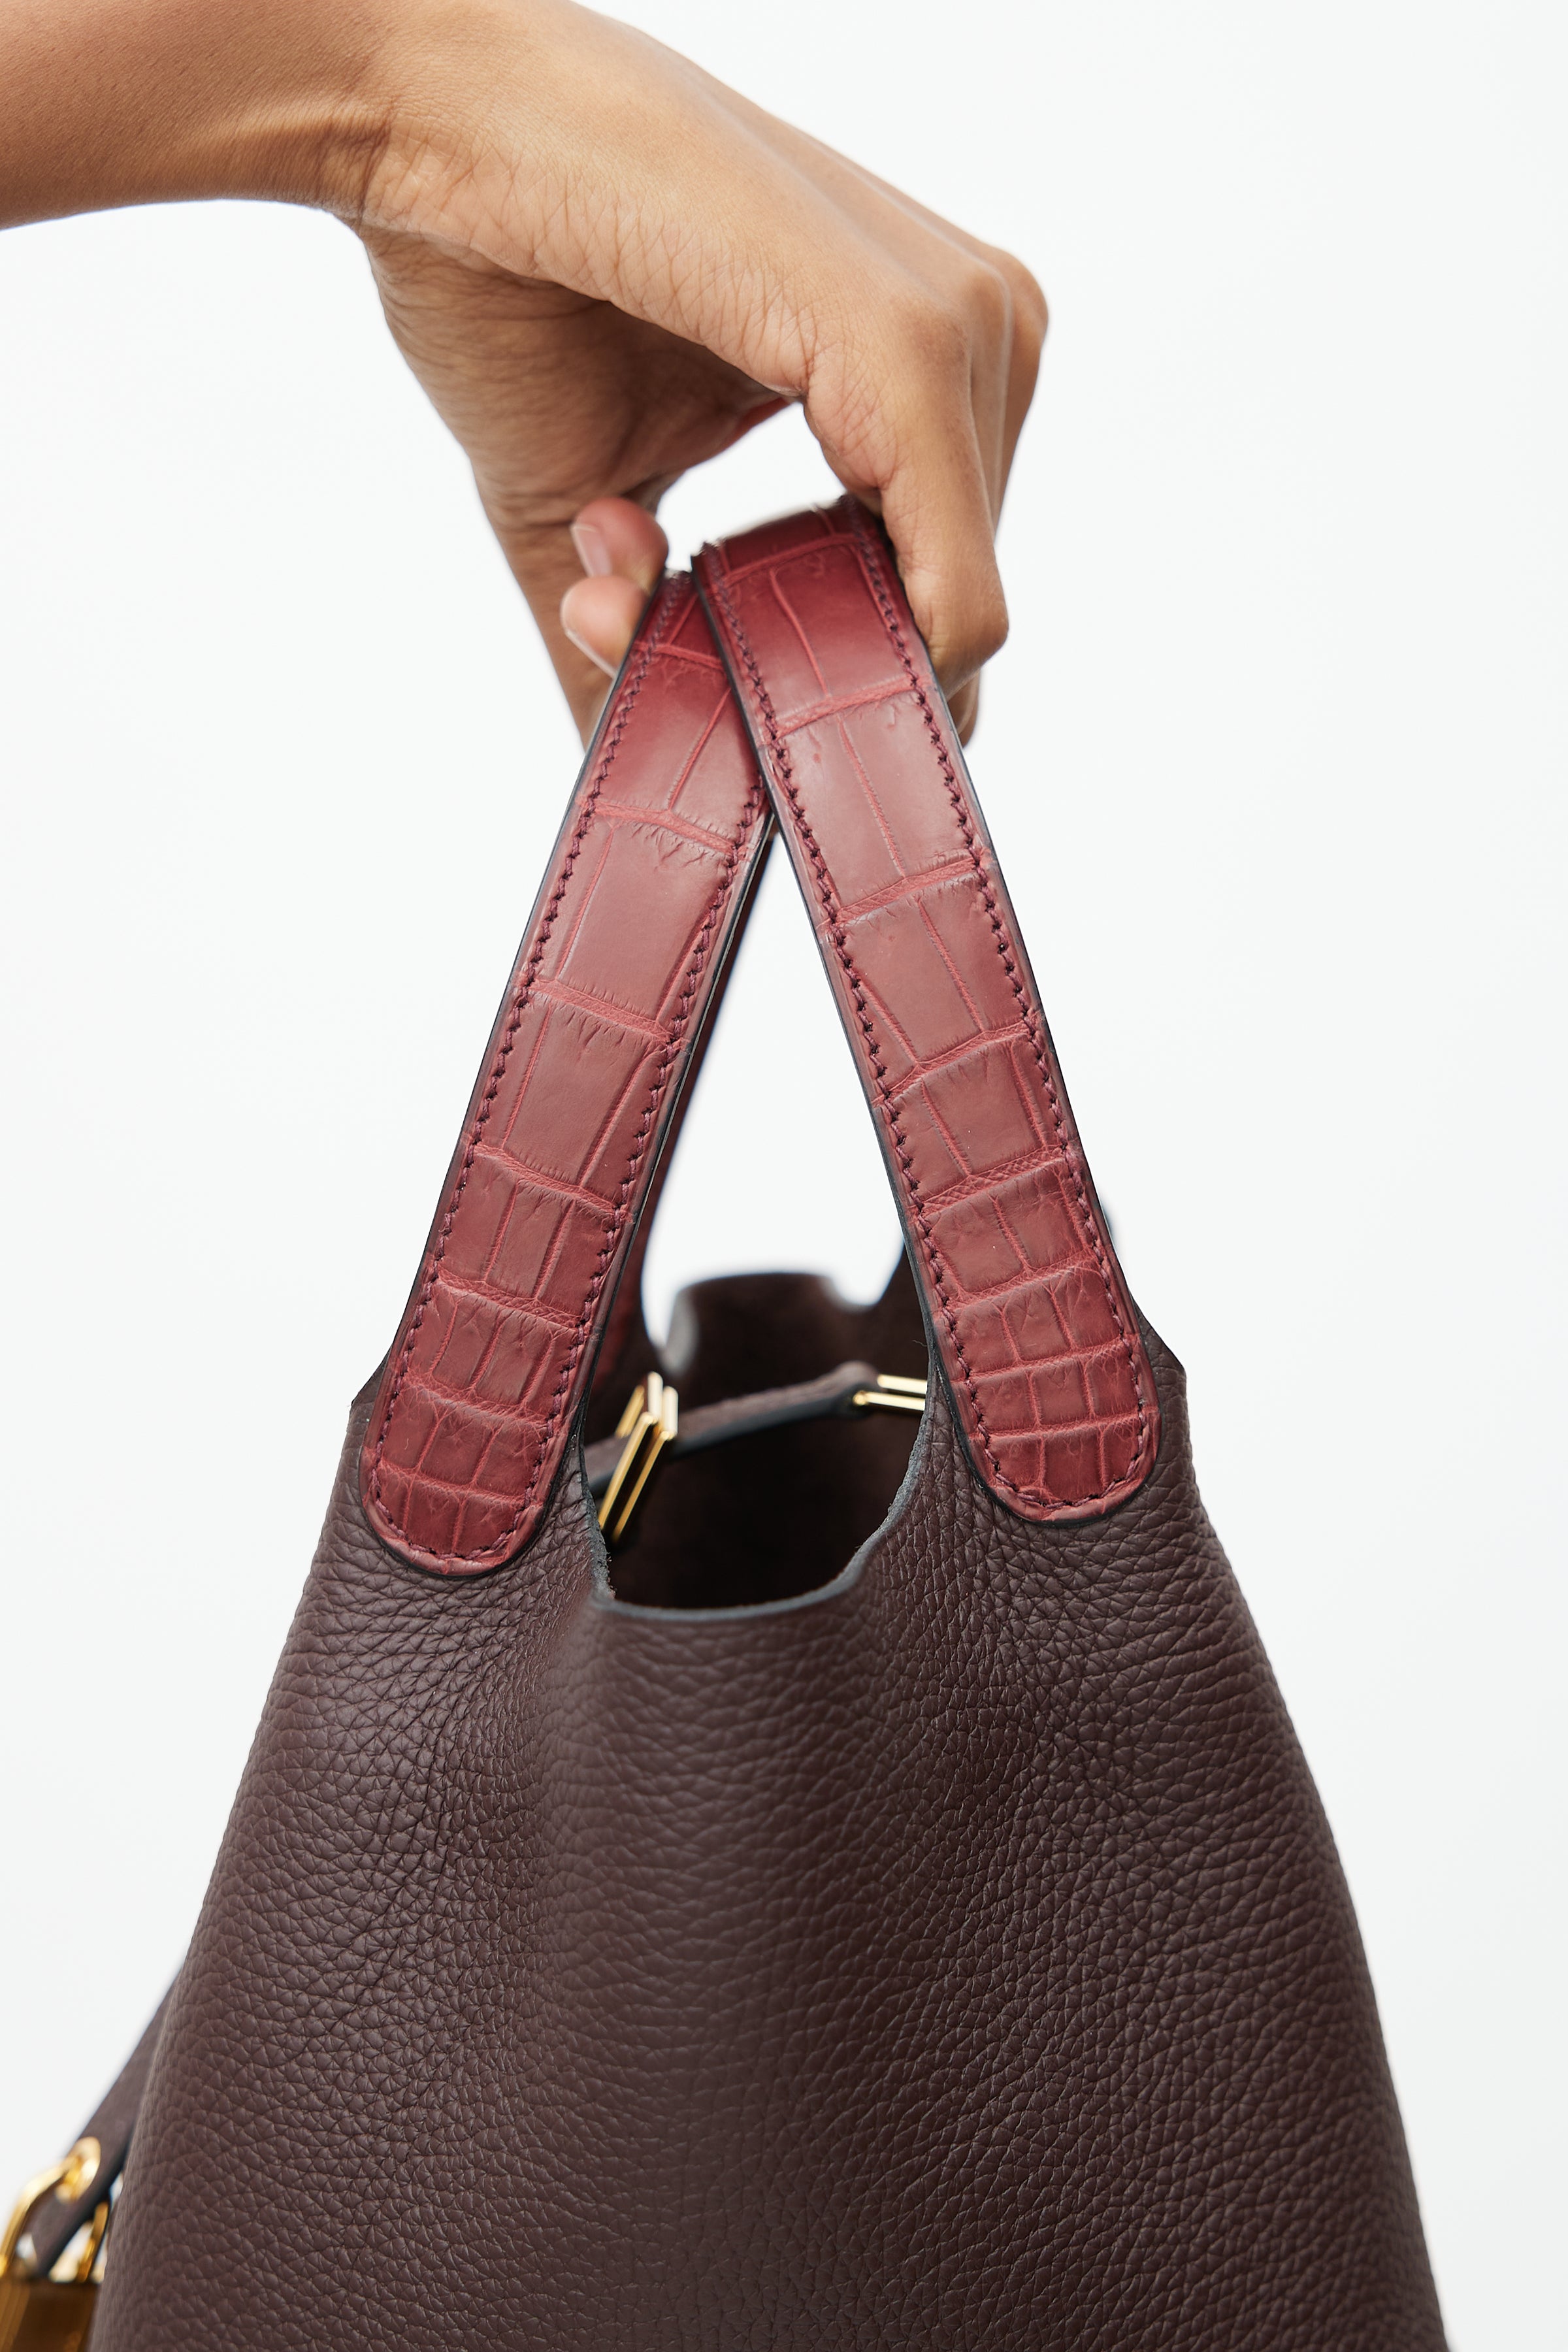 hermes rouge sellier picotin